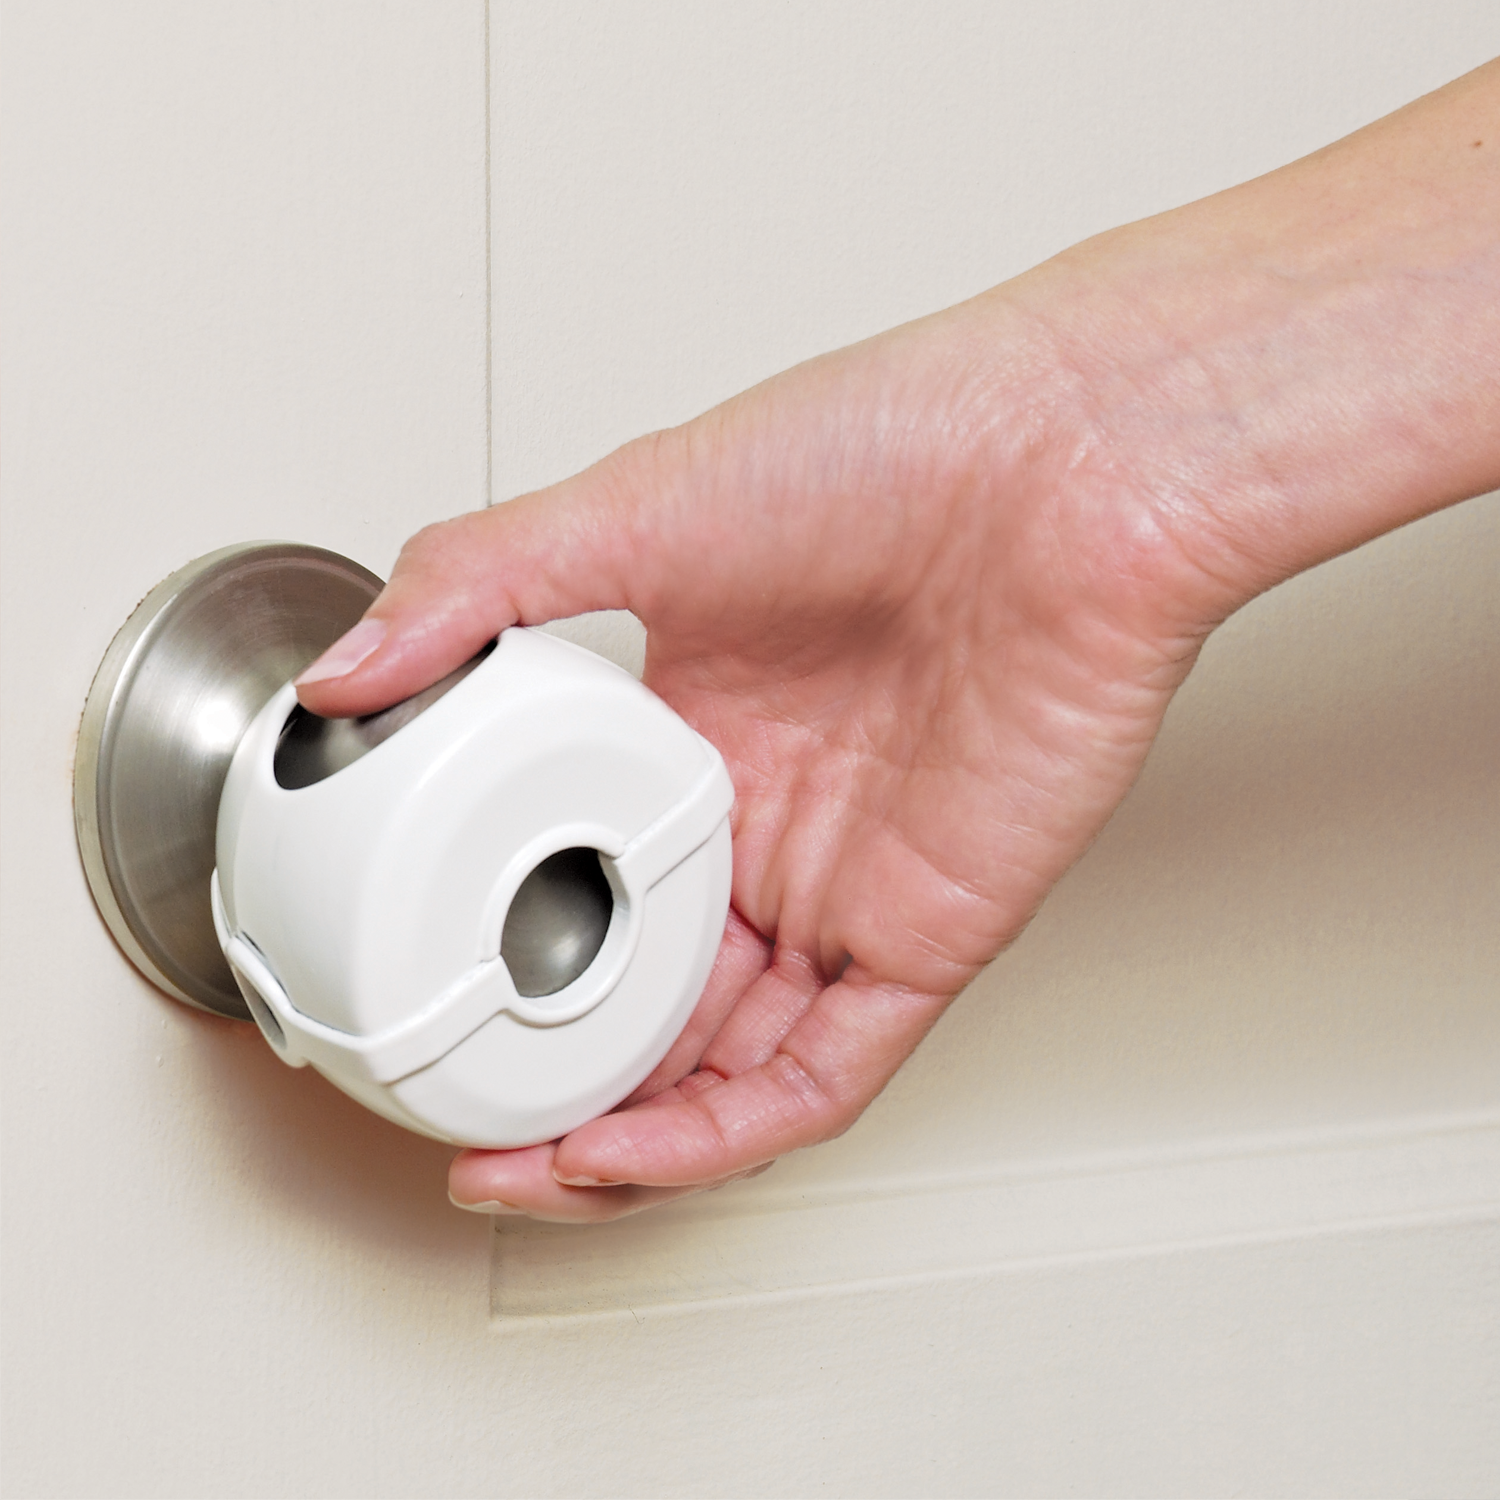 child safety door knob covers photo - 4